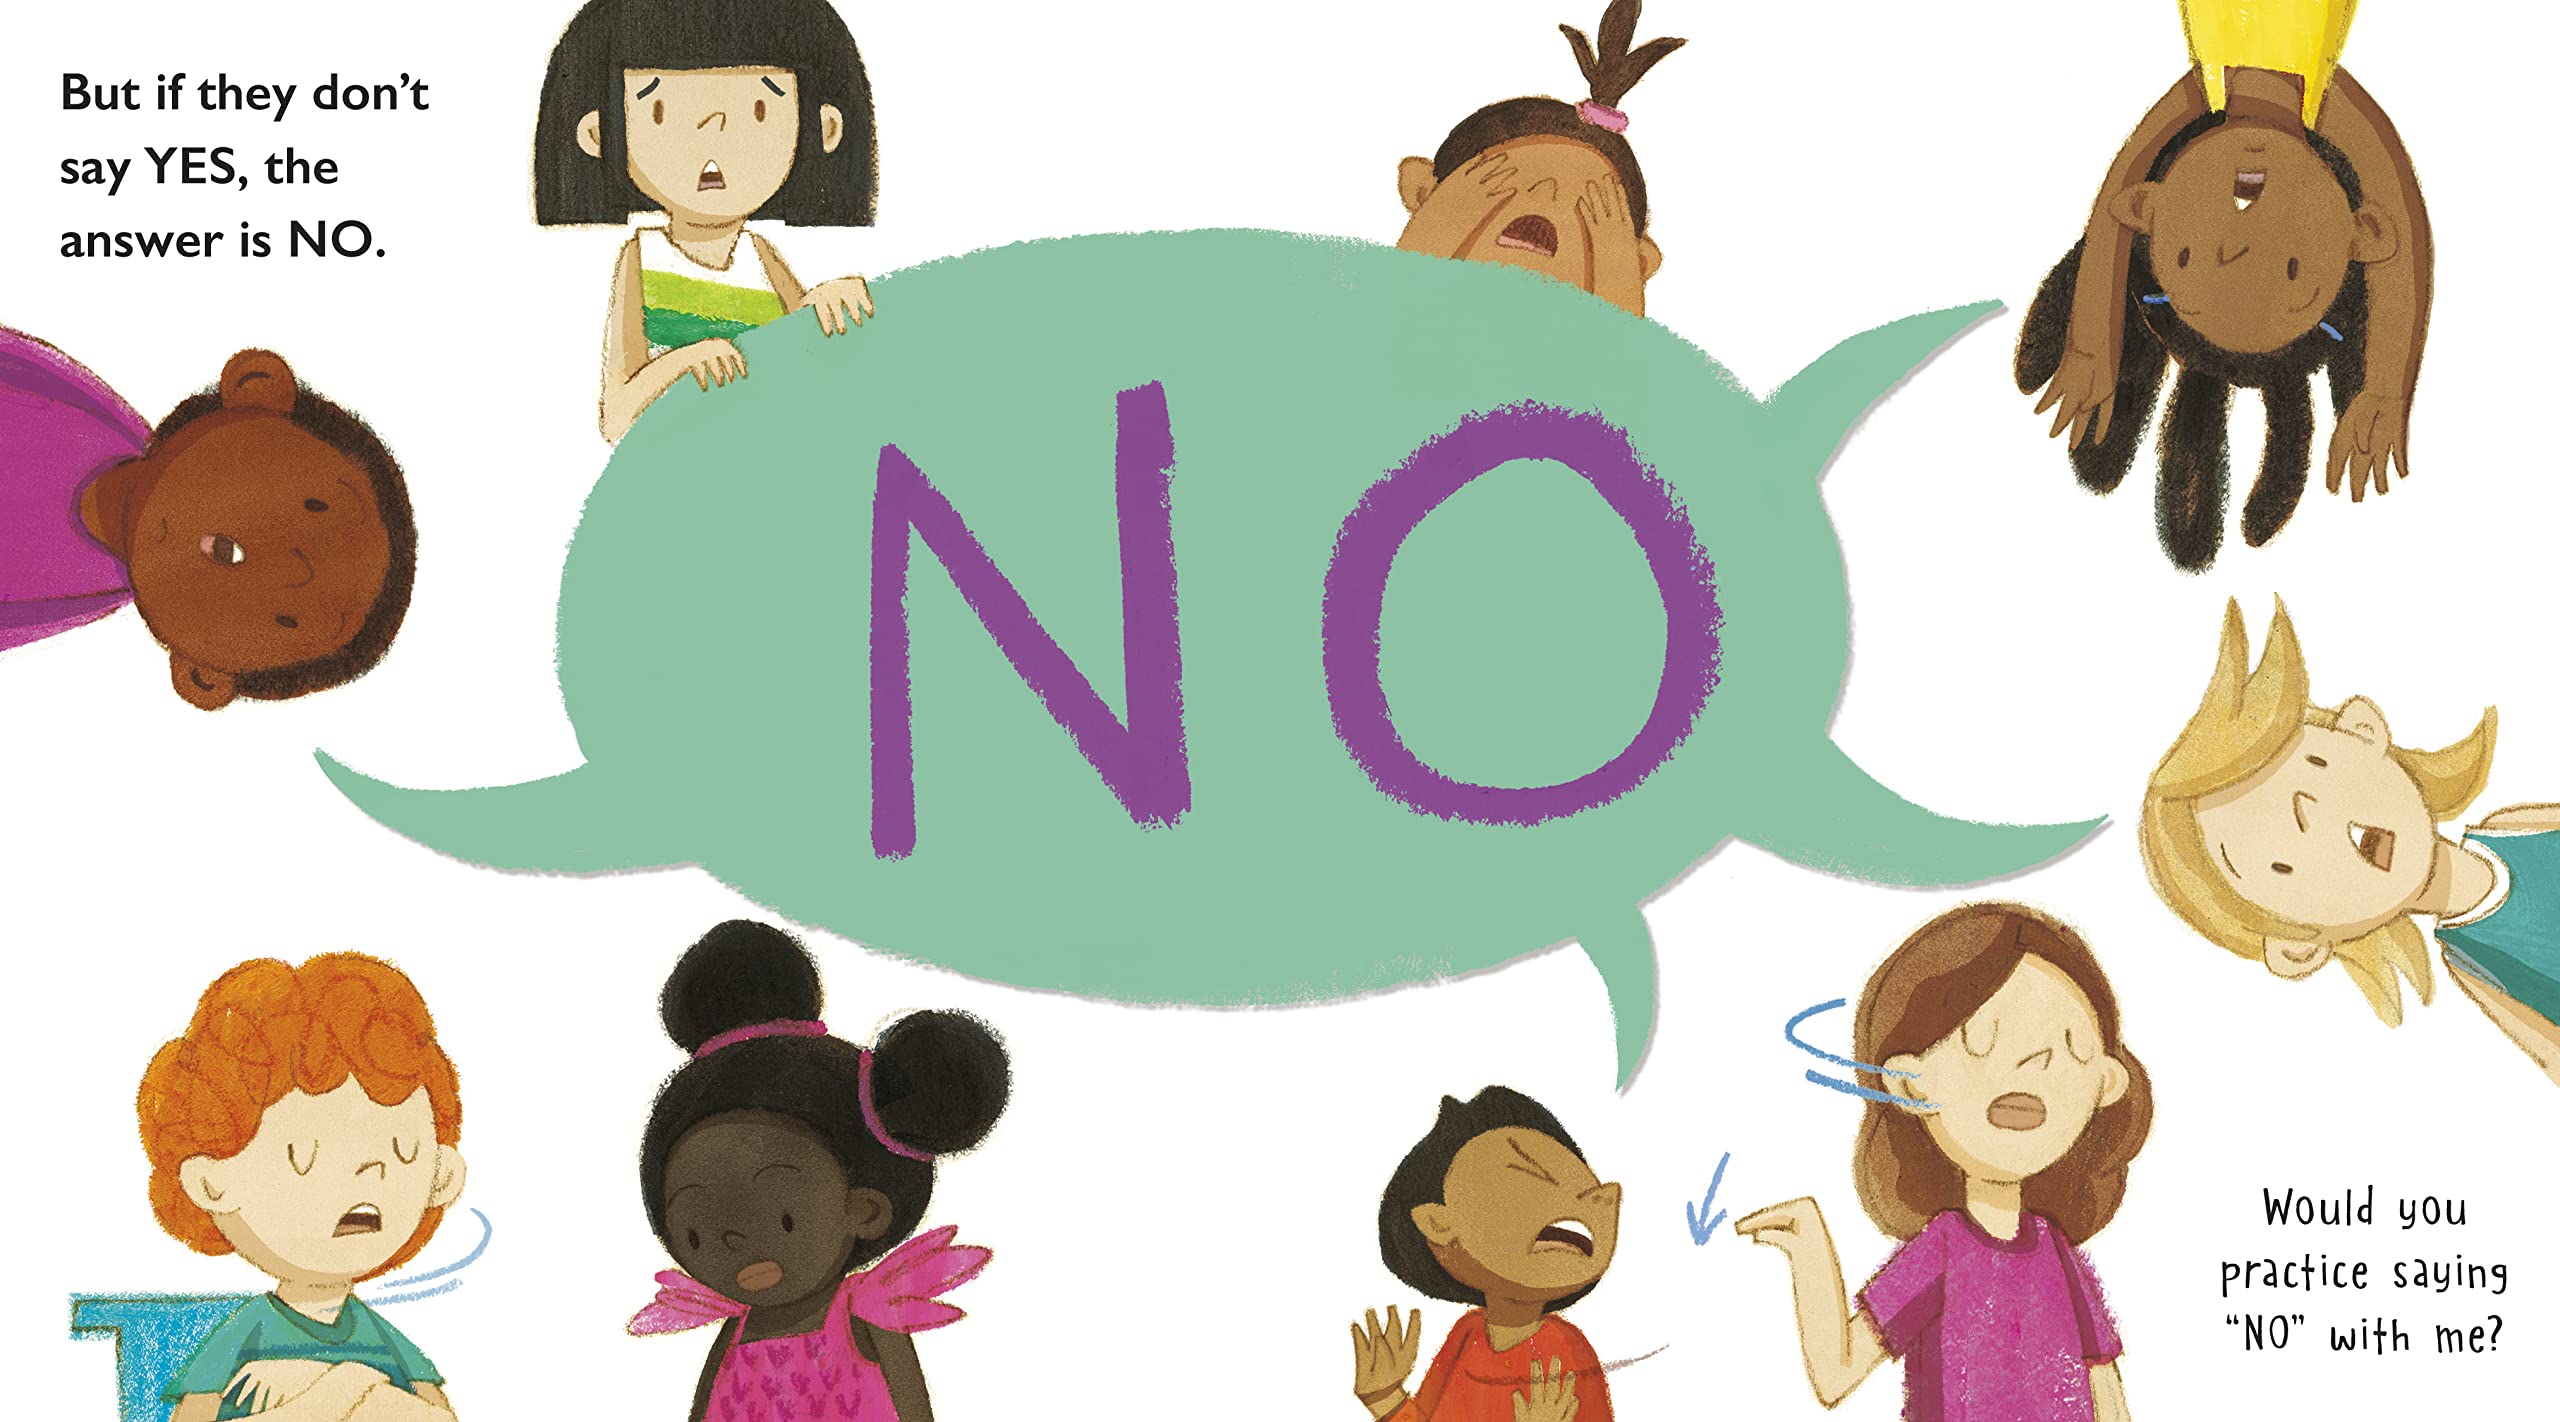 Yes! No!: A First Conversation About Consent